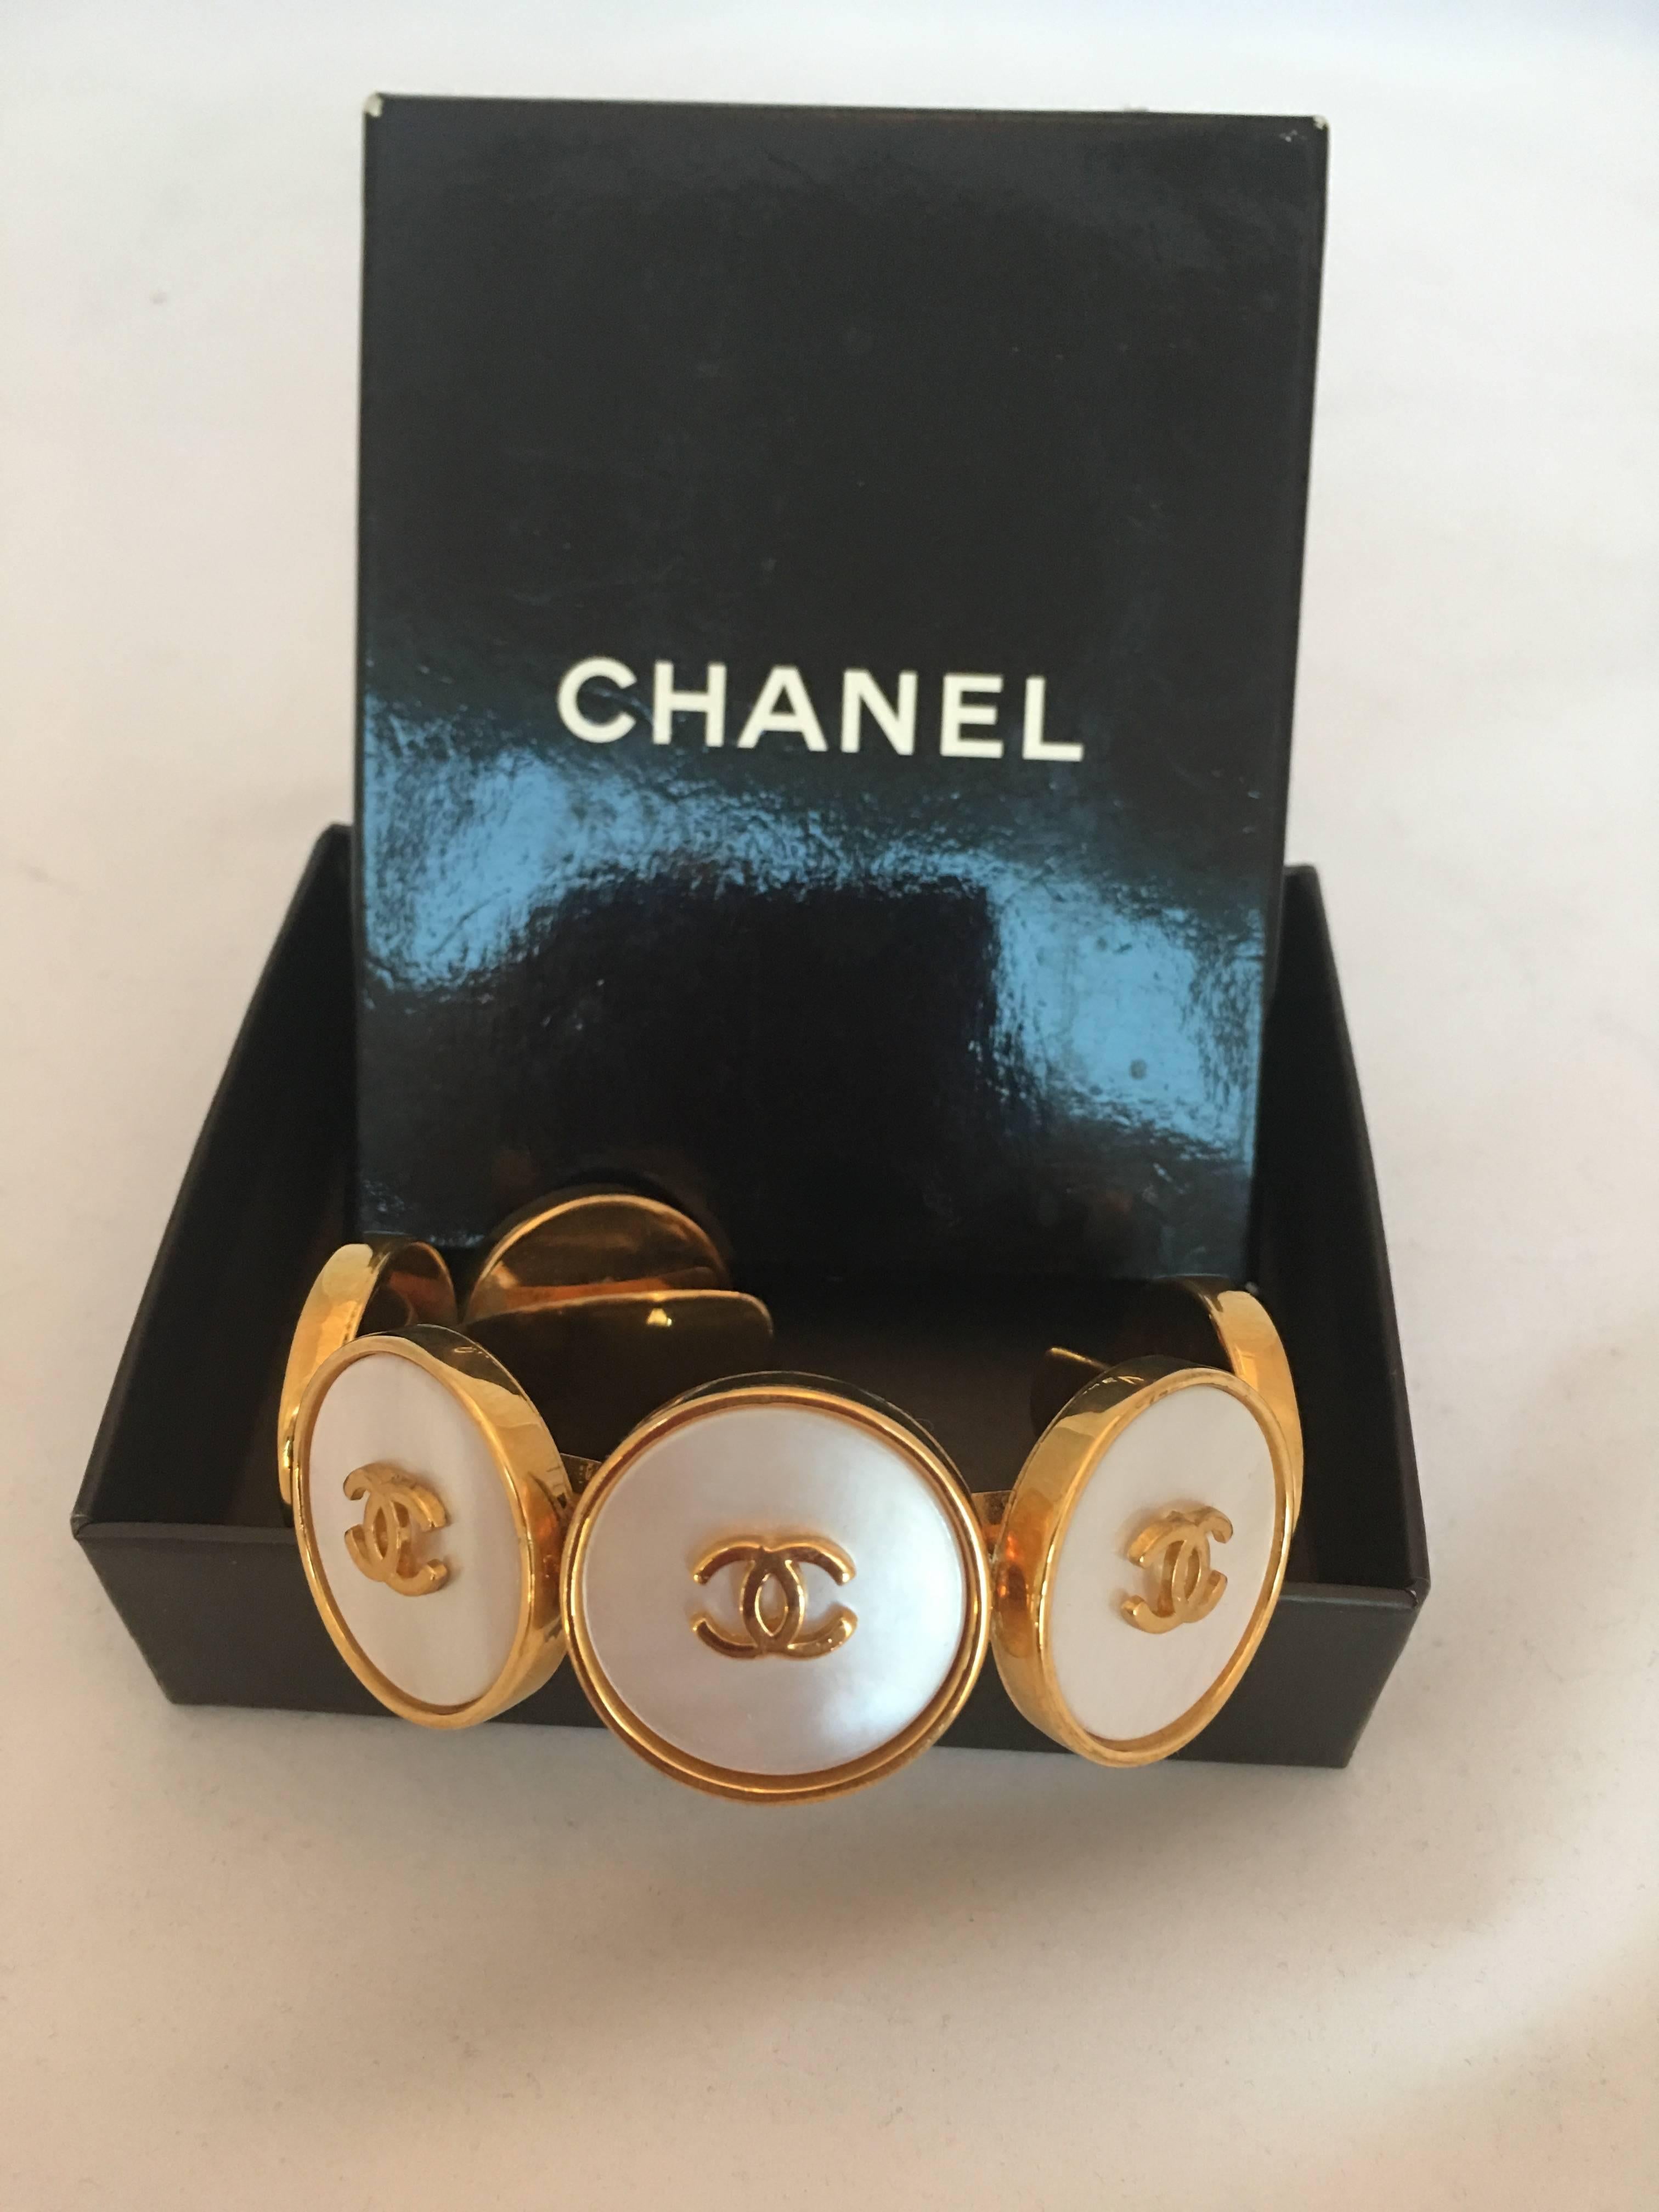 Chanel 1980's Mother of Pearl & Gold Tone Cuff Bracelet

Width: 1